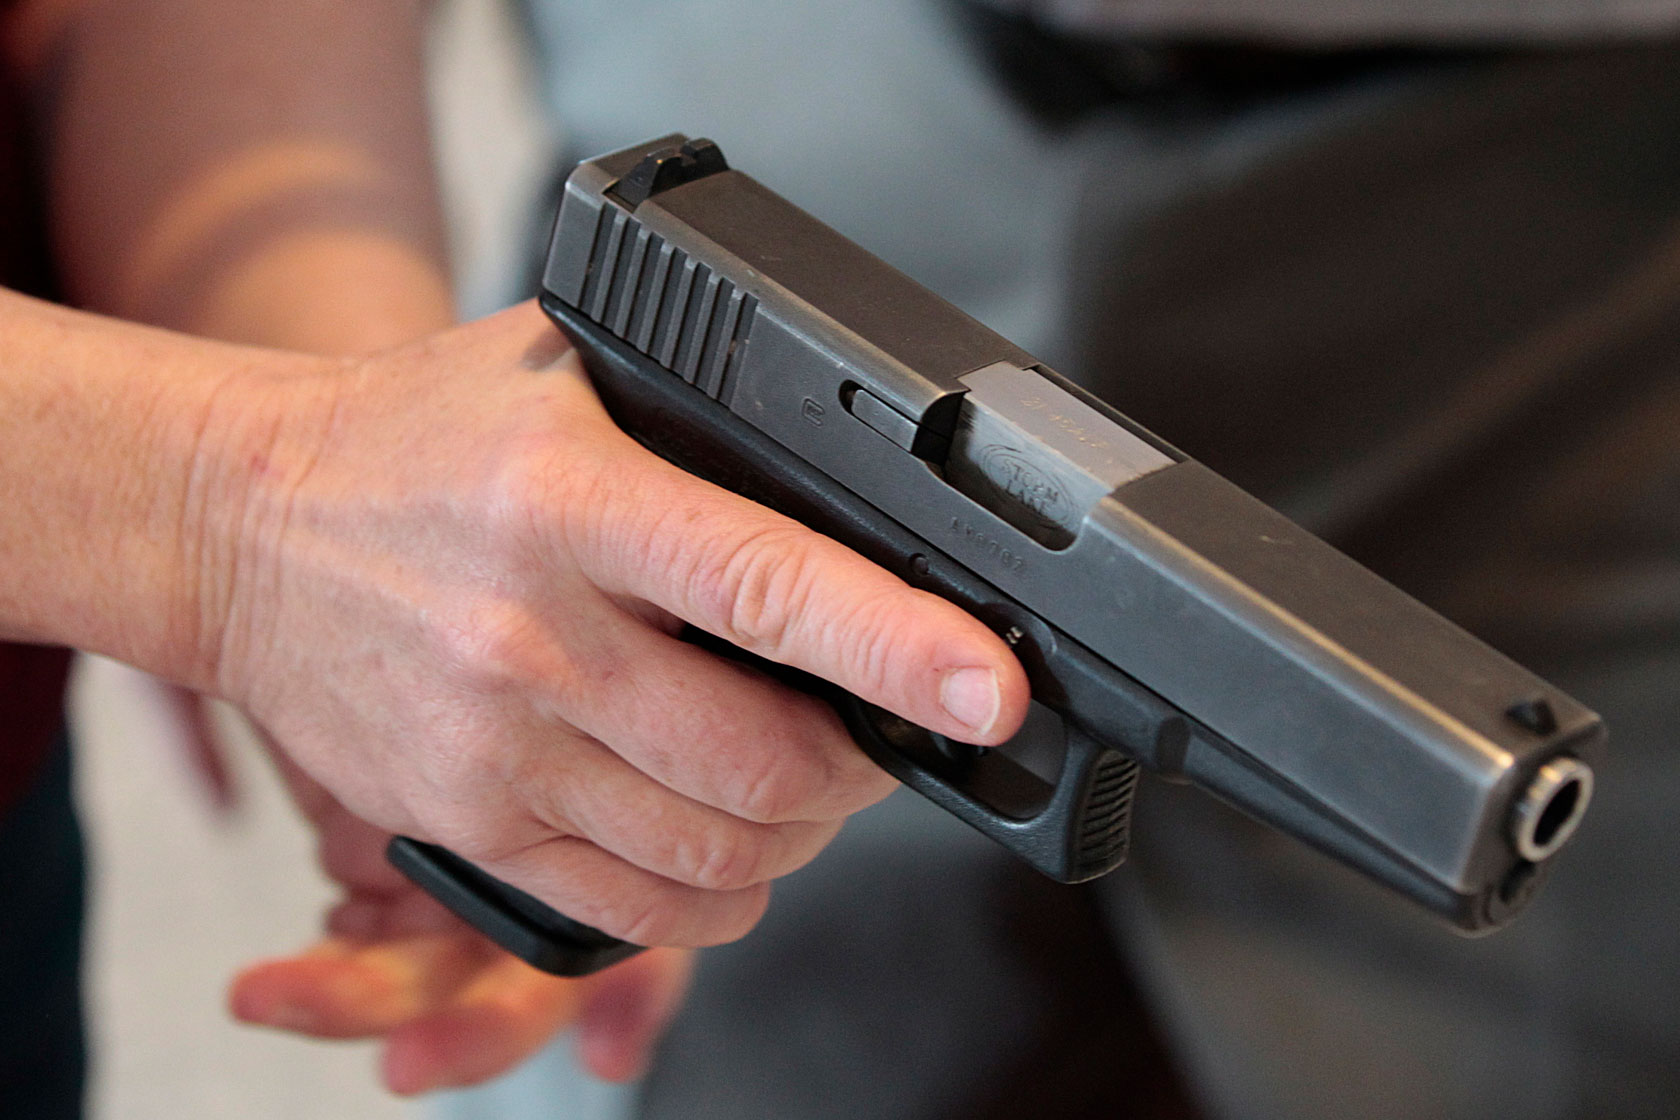 Concealed Carry Applications Down For 2020 Fiscal Year